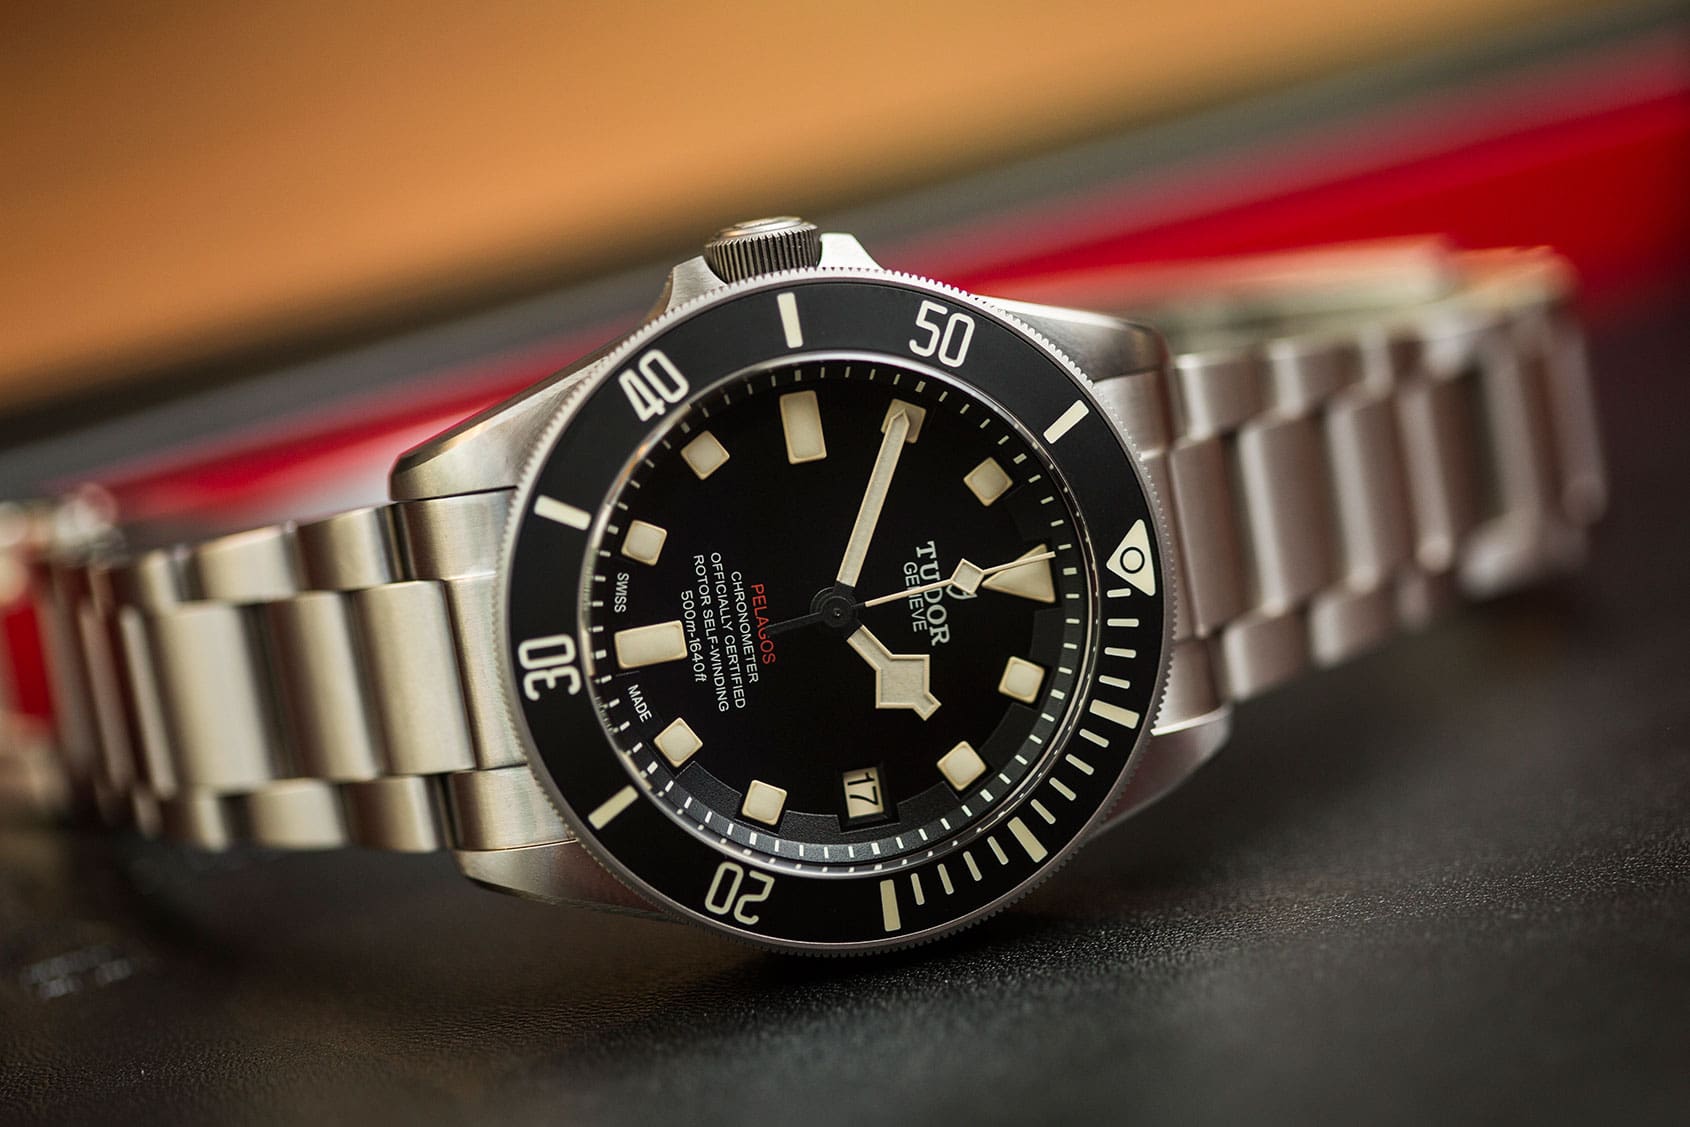 The Tudor Pelagos LHD is excellent, but we want more